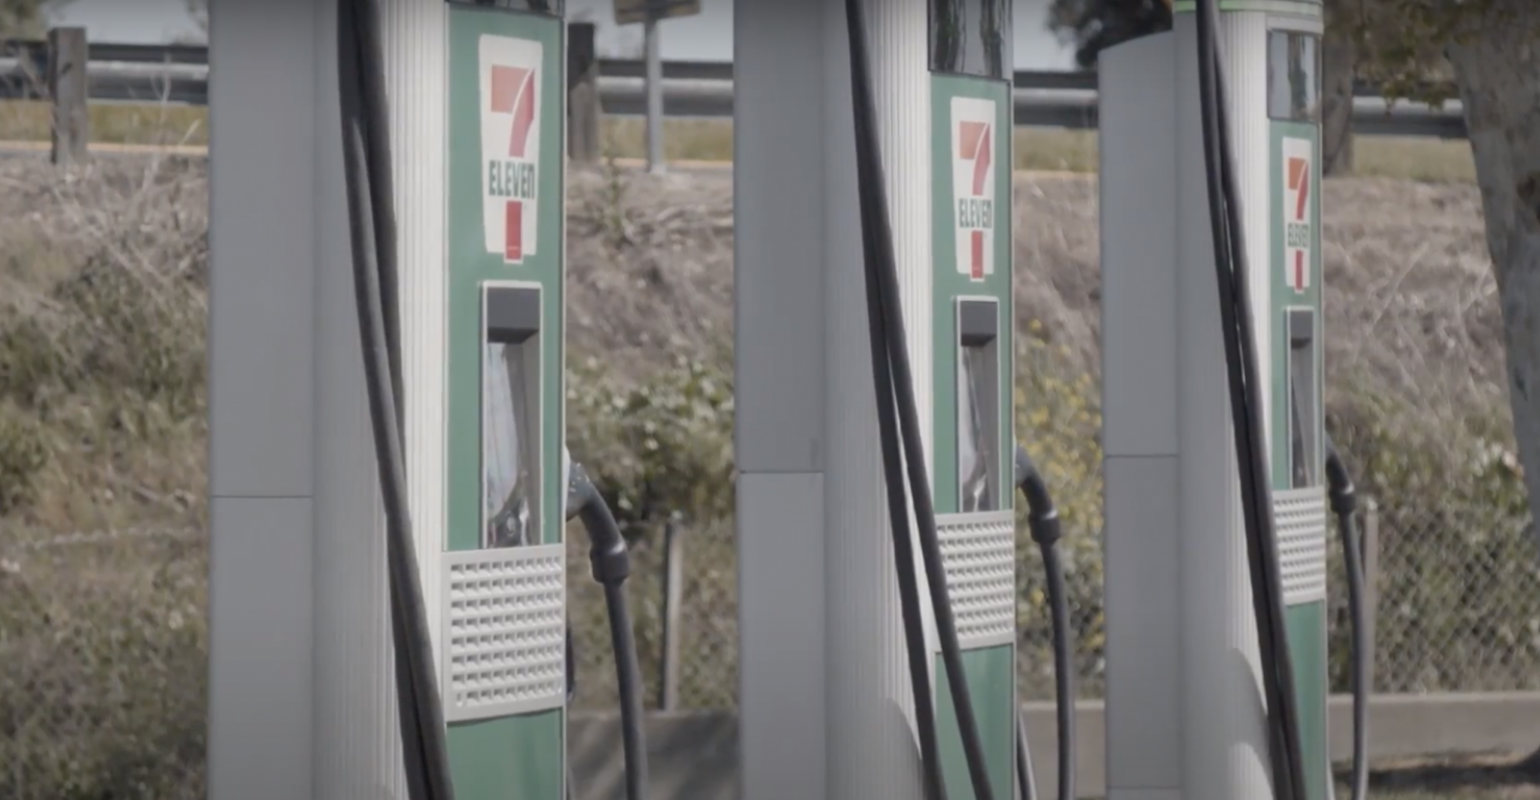 7Eleven rolling out 500 electric vehicle ports by end of 2022